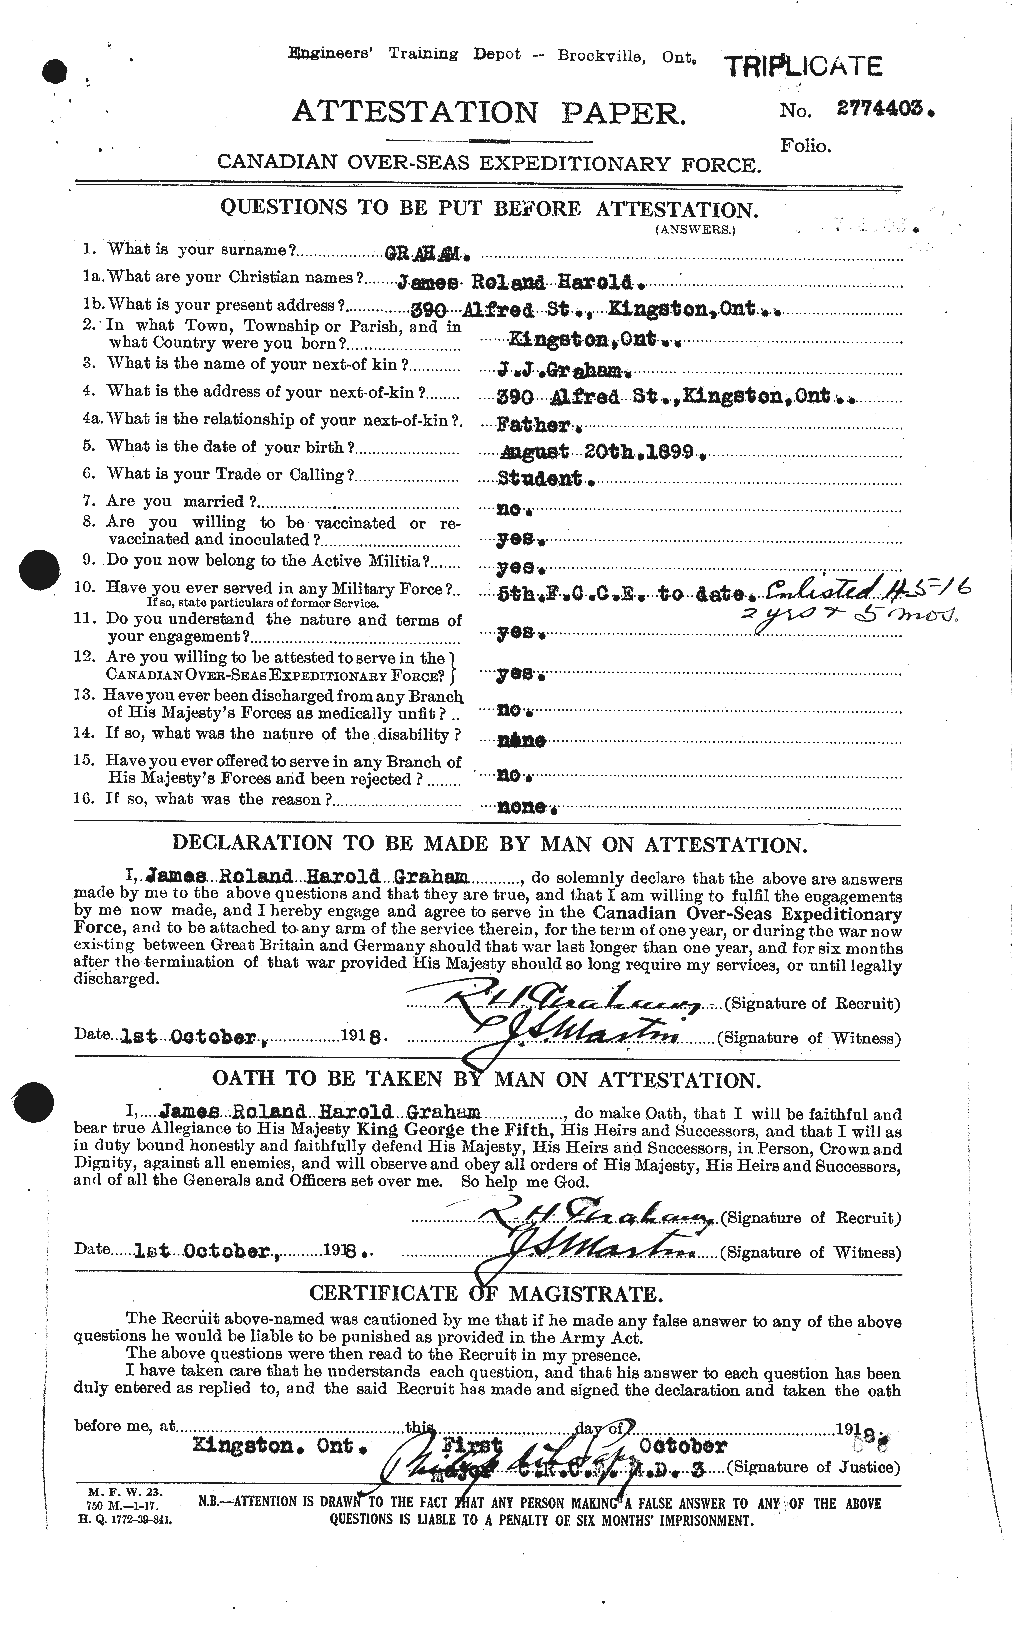 Personnel Records of the First World War - CEF 359095a